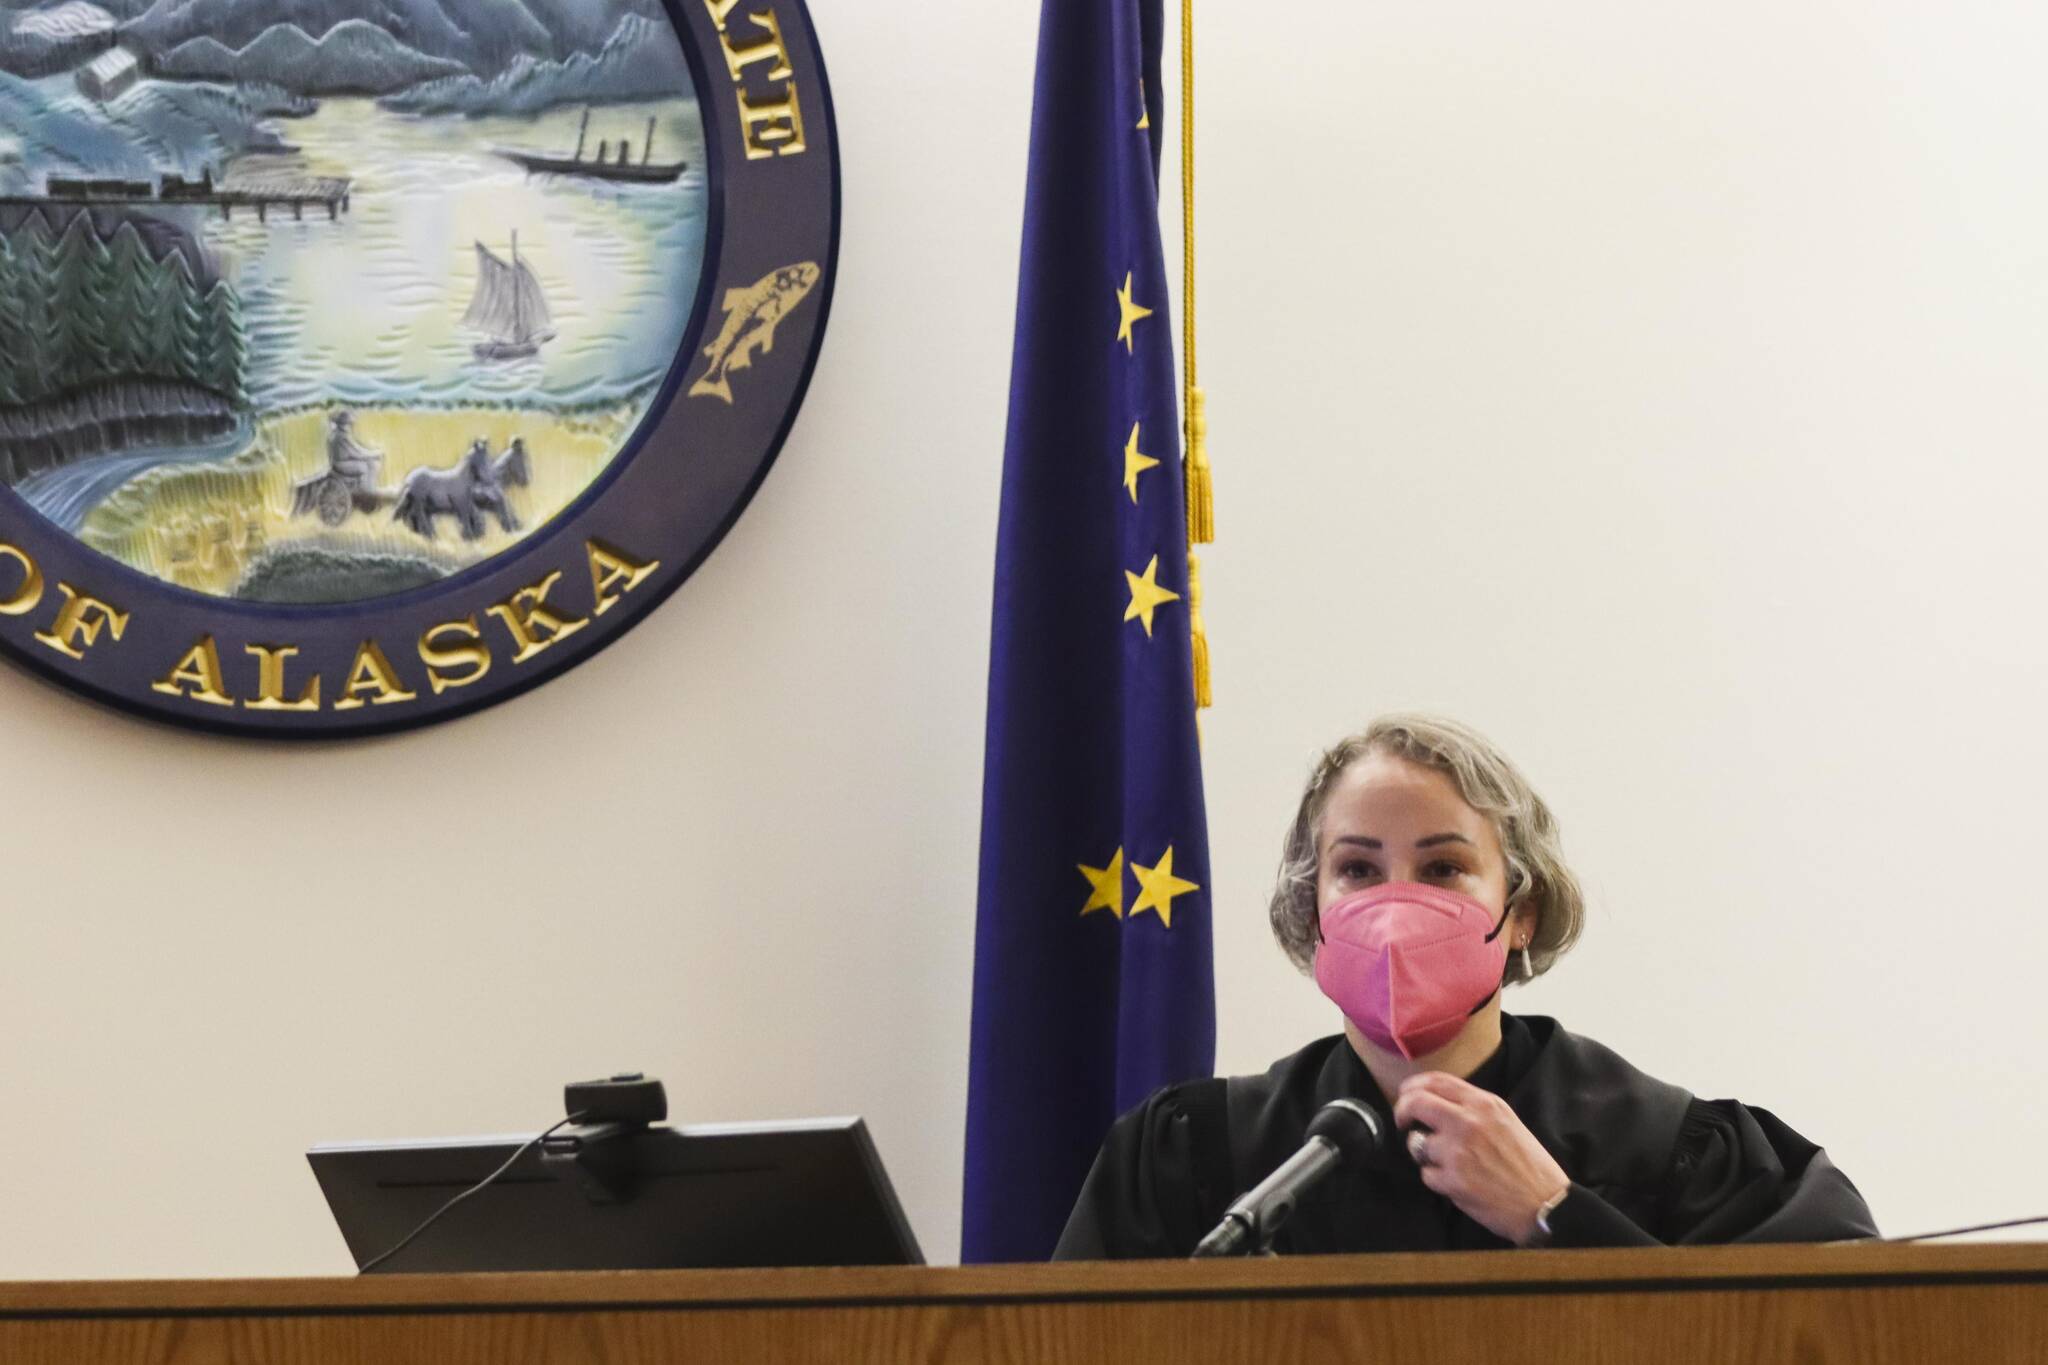 Juneau Superior Court Judge Amy Mead speaks to the attorneys during a trial centered around a 2019 stabbing May 19, 2022. (Michael S. Lockett / Juneau Empire)